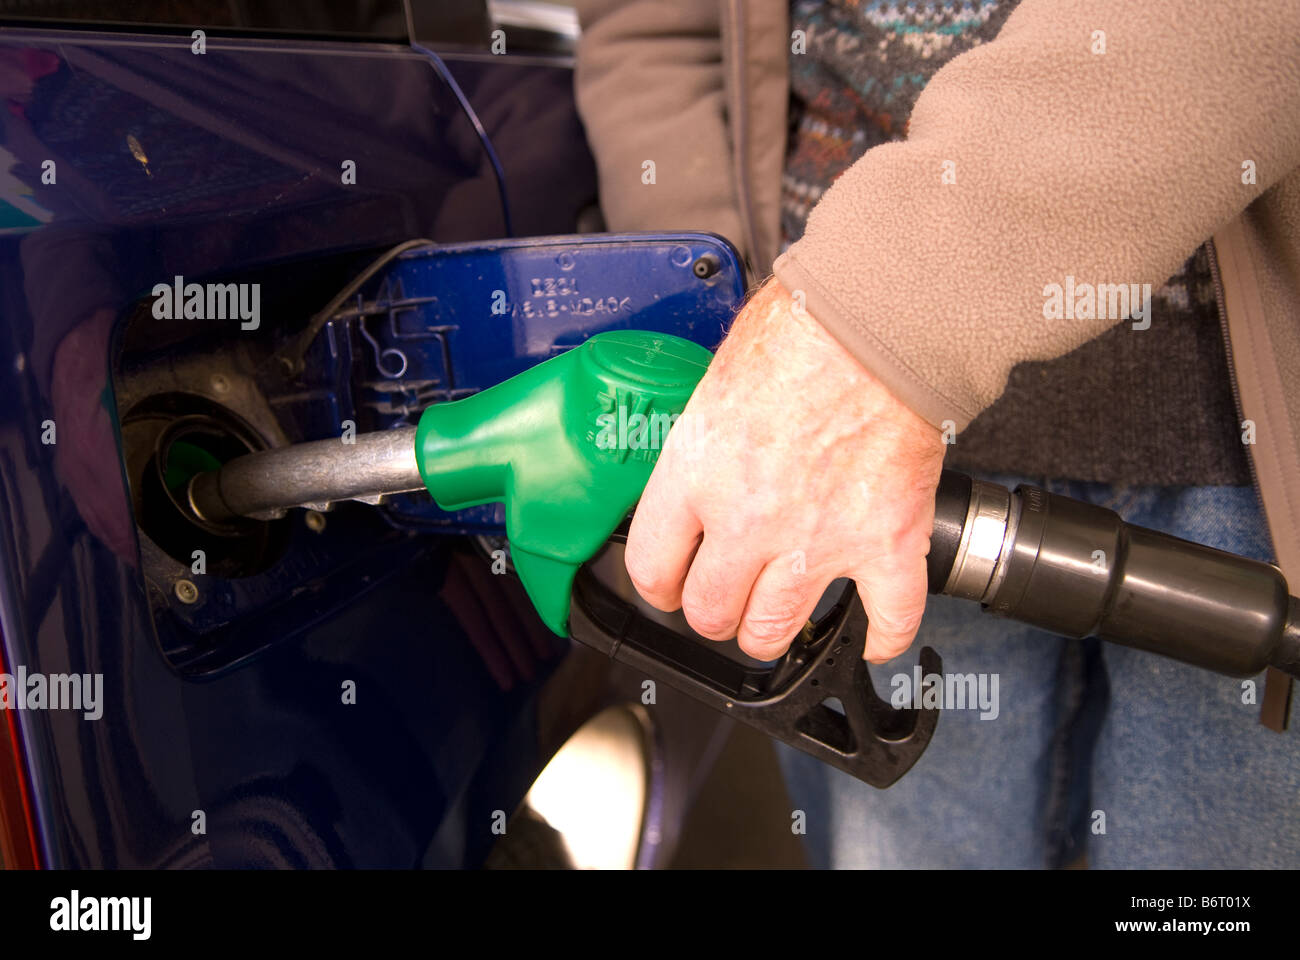 73 year old ex pat Englishman filling up car with petrol at a station in Castell De Ferro, Granada, Andalucia, southern Spain. Stock Photo